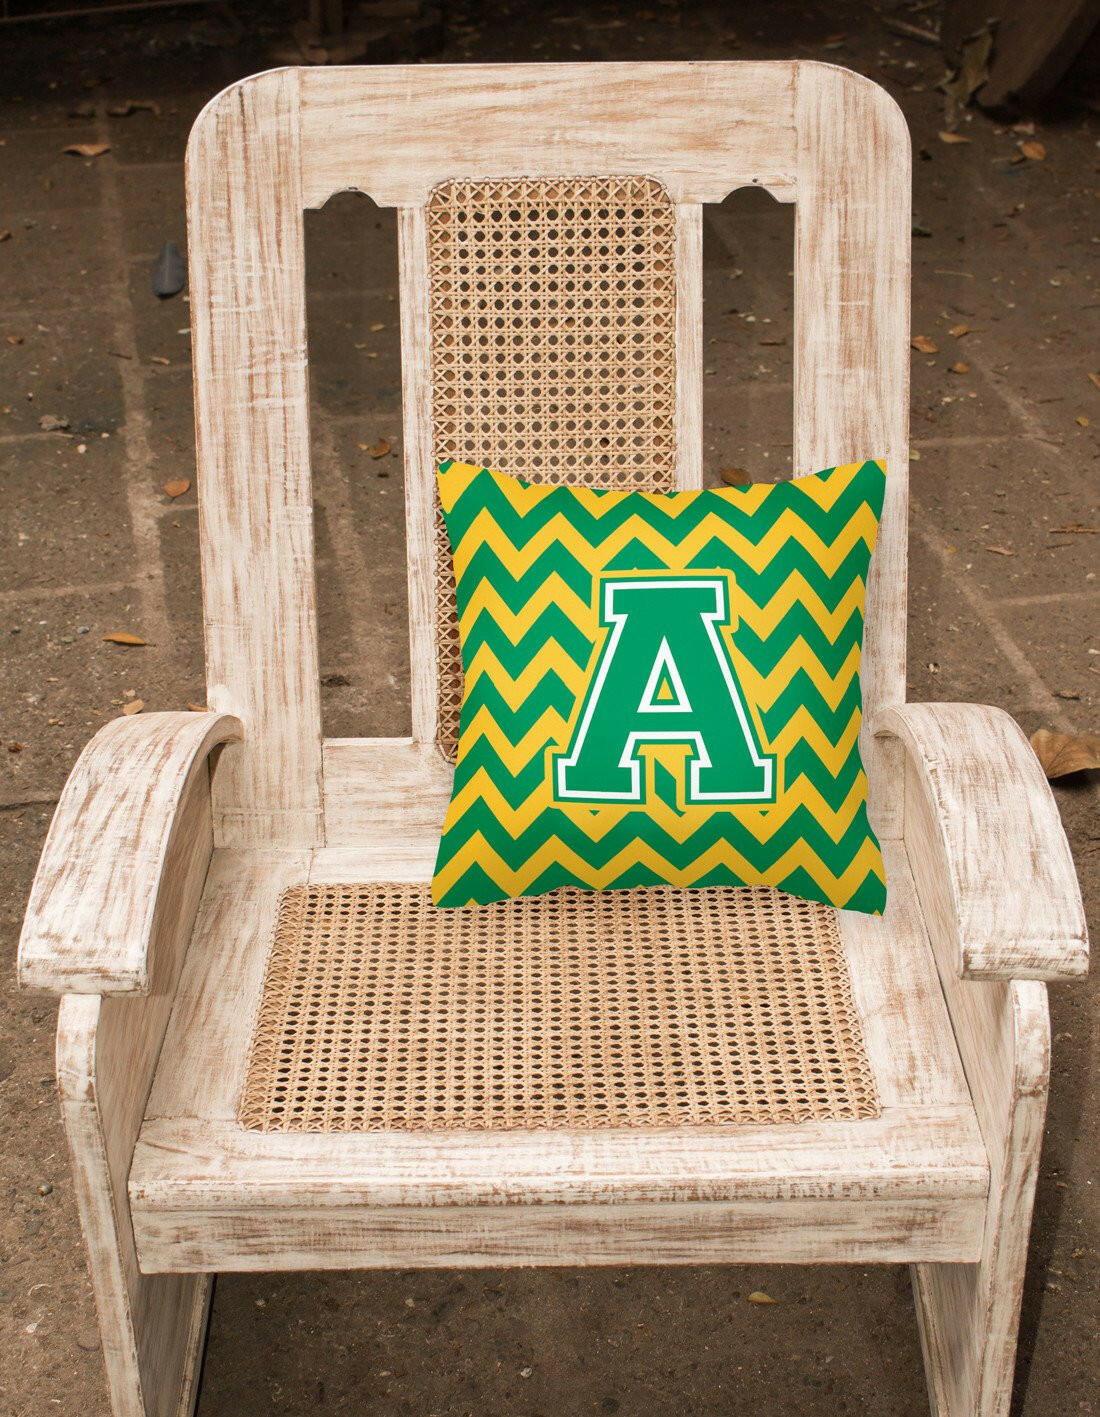 Letter A Chevron Green and Gold Fabric Decorative Pillow CJ1059-APW1414 by Caroline's Treasures